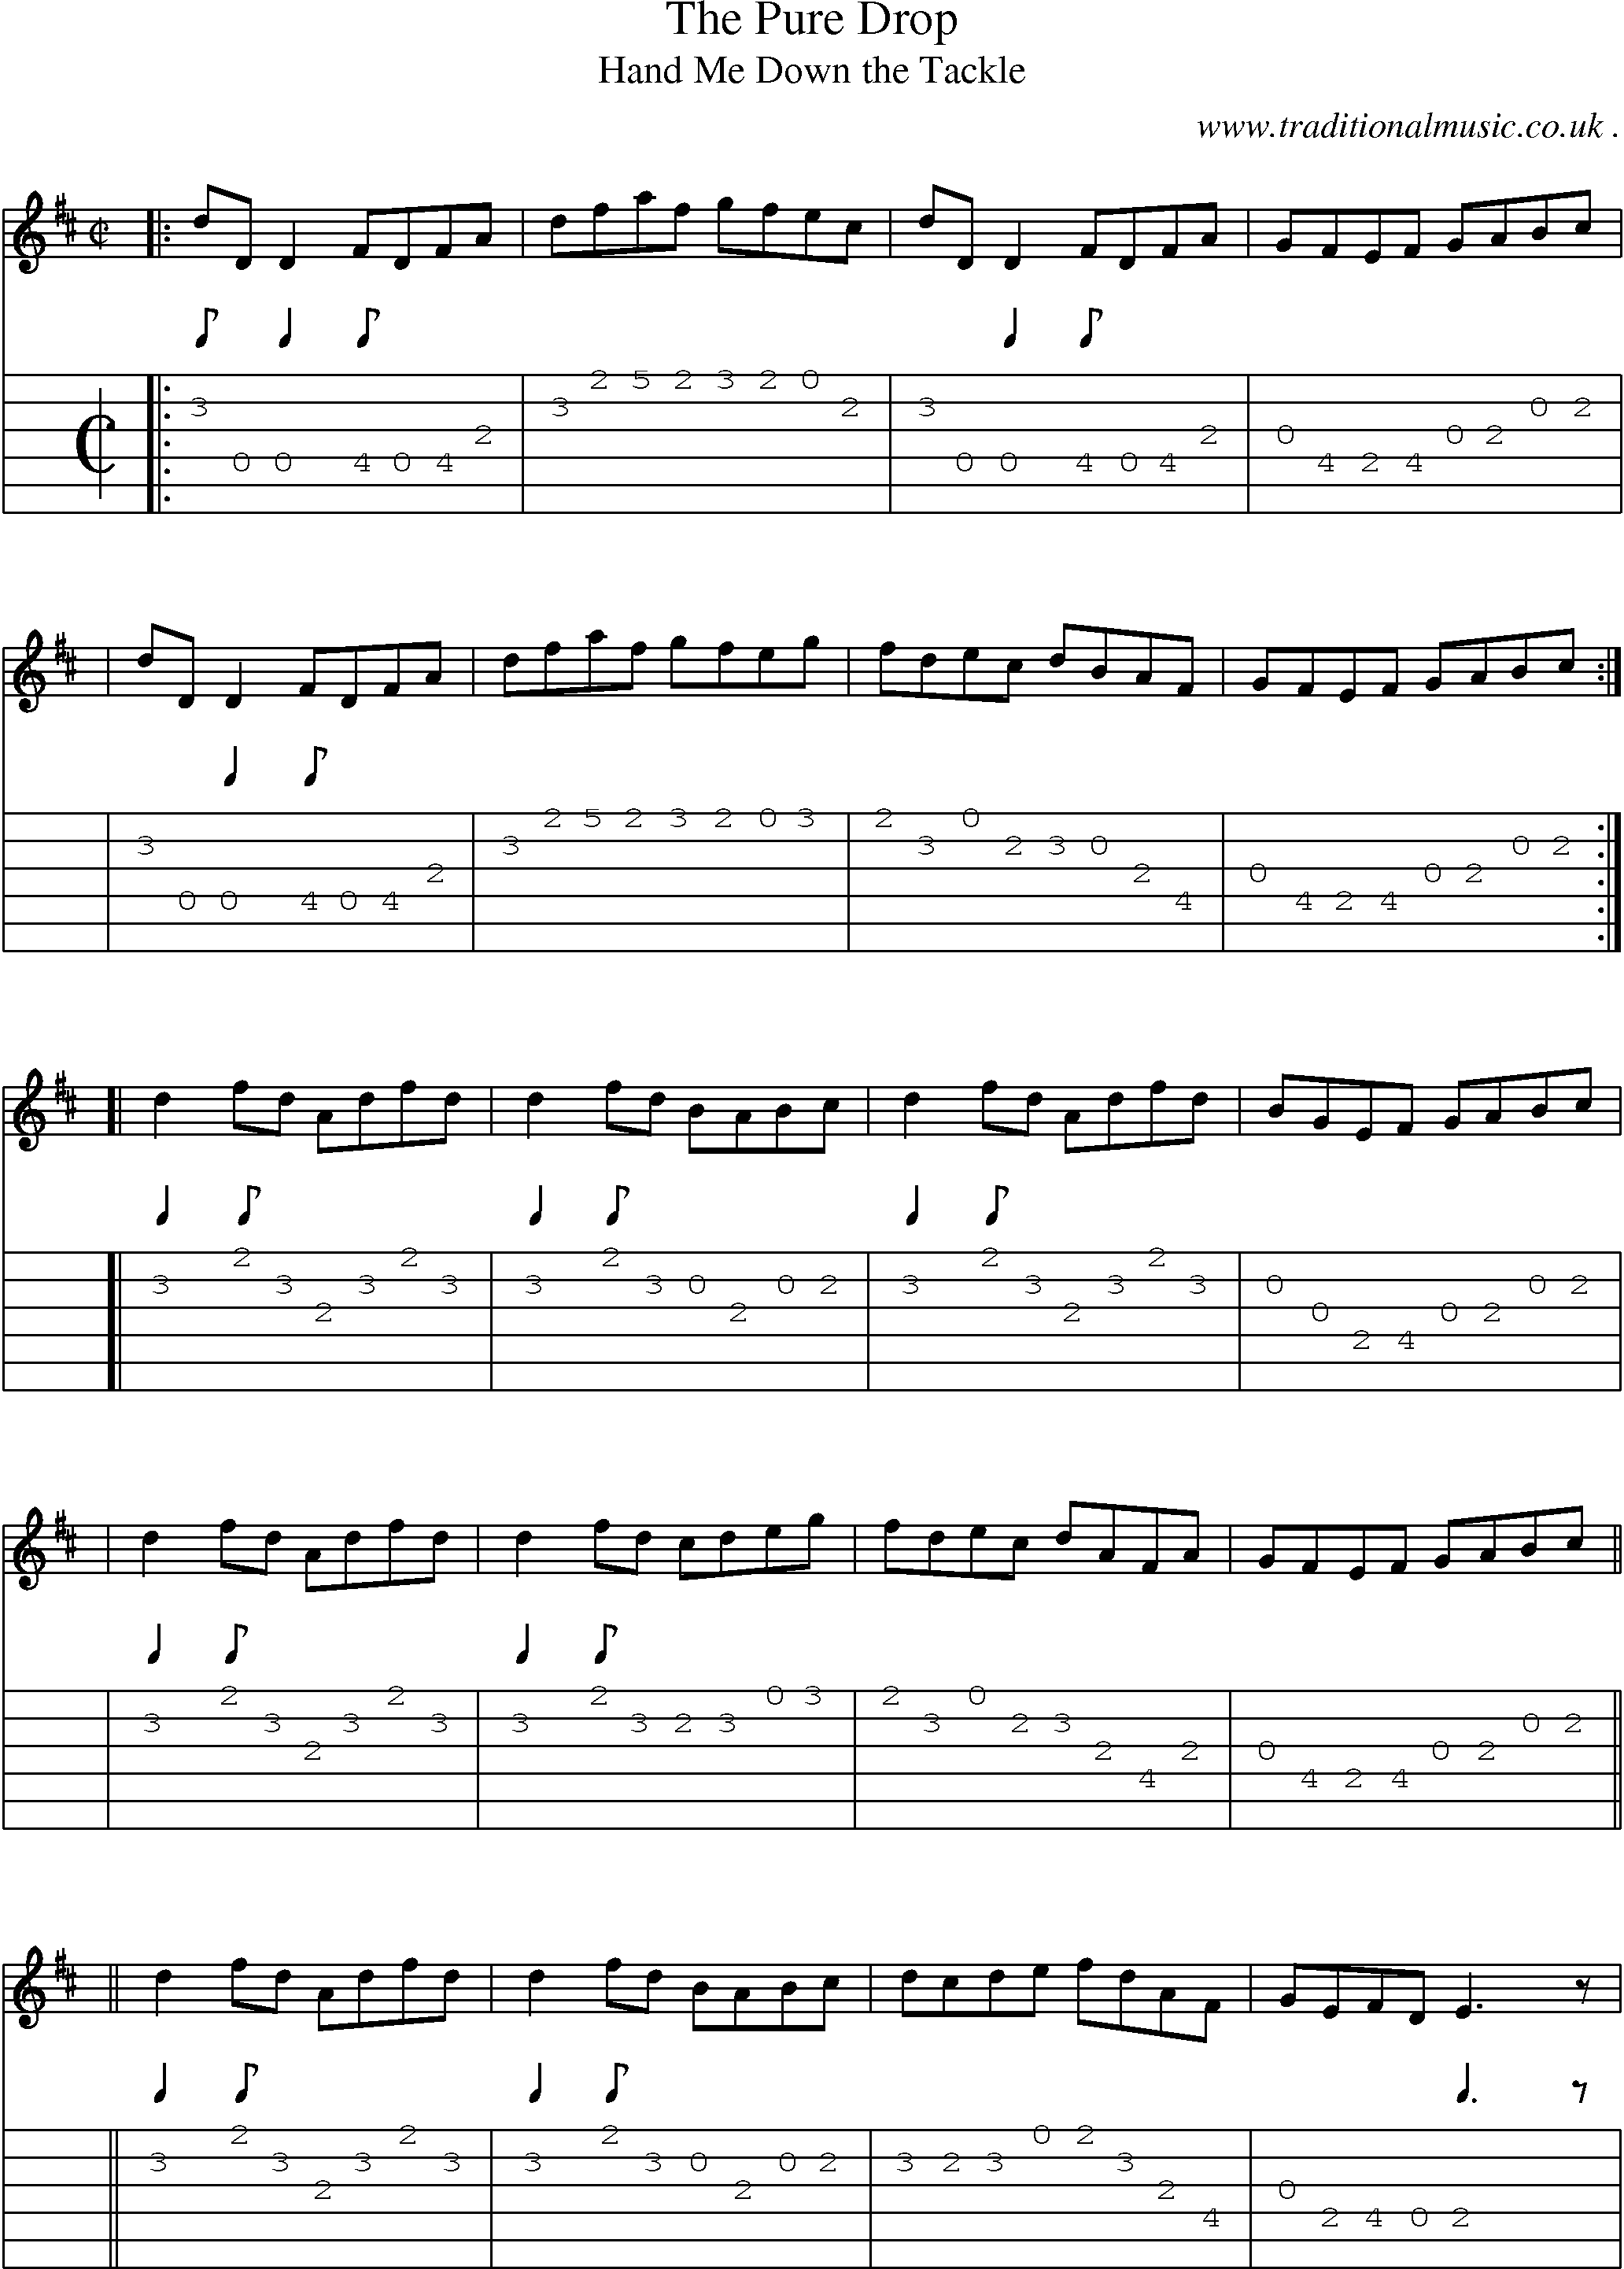 Sheet-music  score, Chords and Guitar Tabs for The Pure Drop